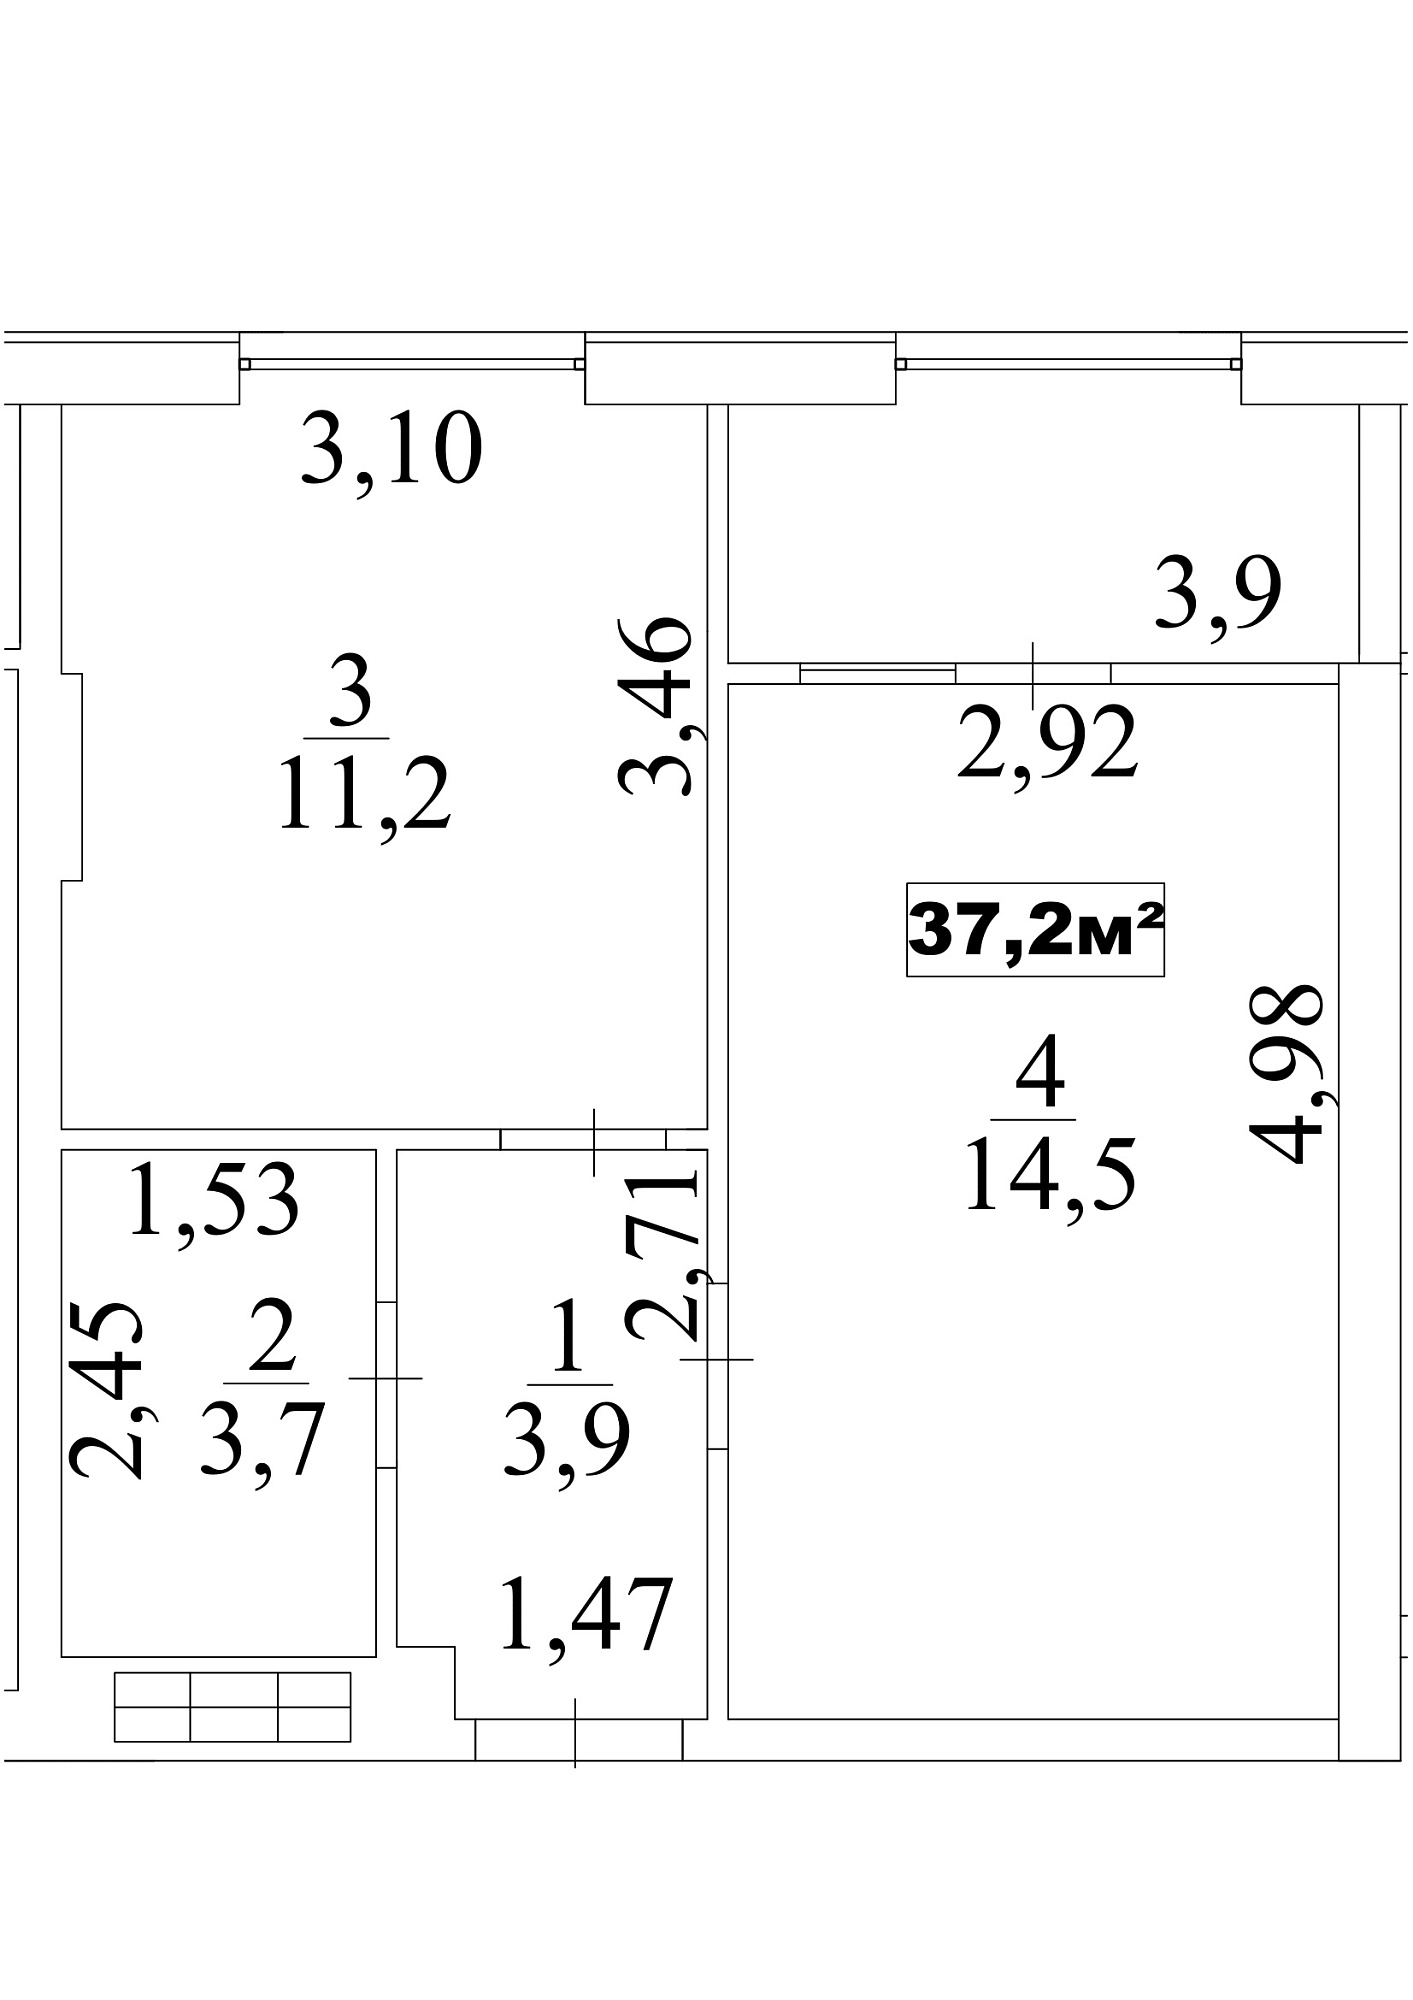 Planning 1-rm flats area 37.2m2, AB-10-01/0007а.